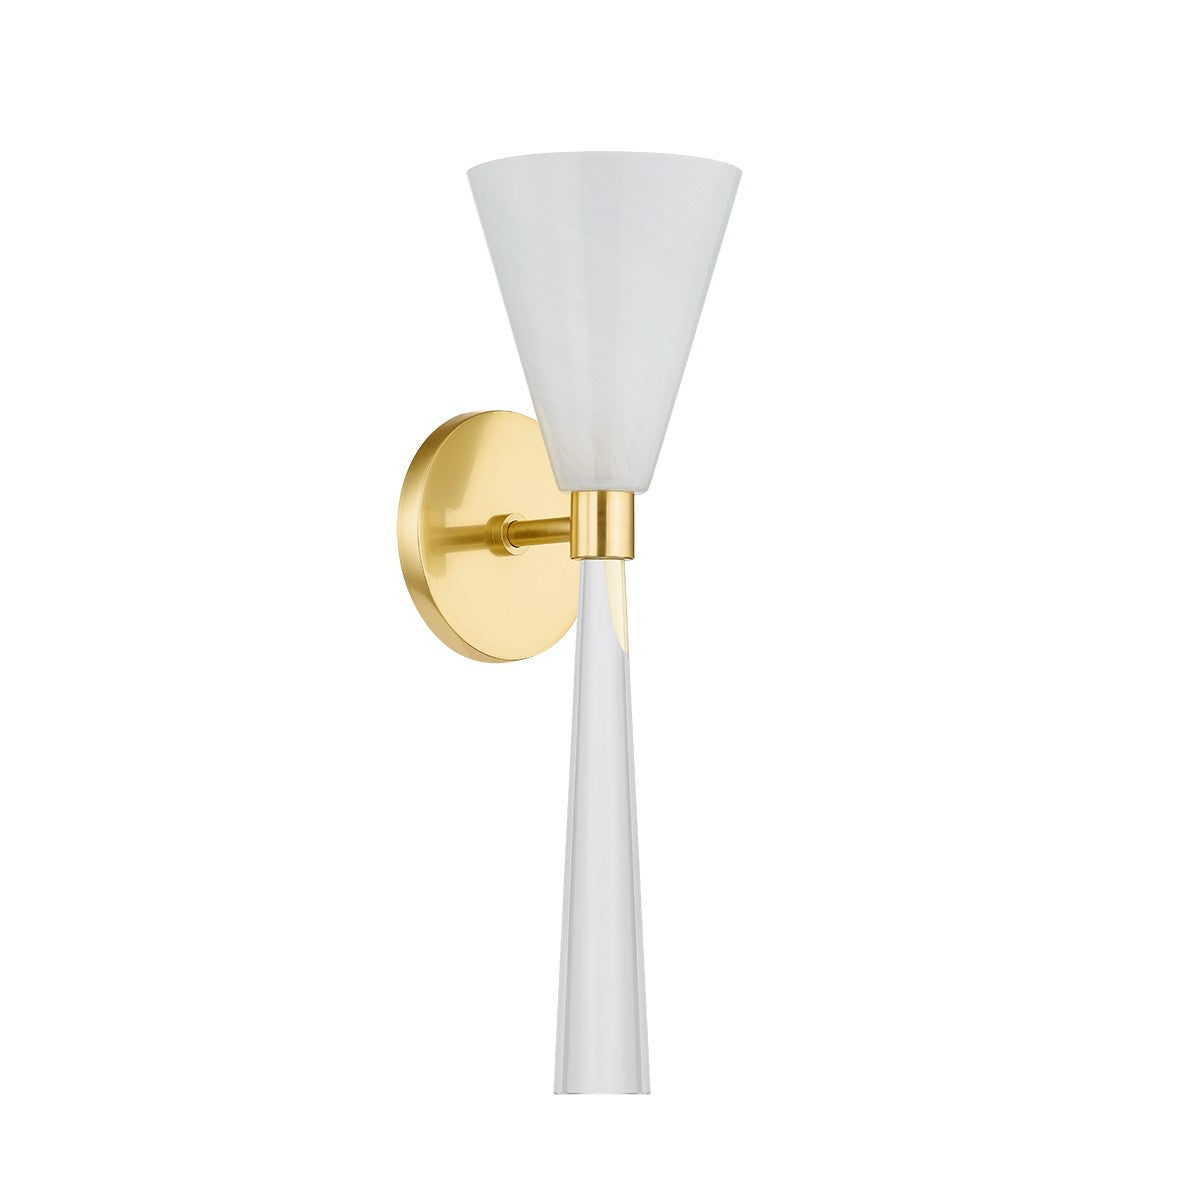 Mitzi - H862101-AGB - One Light Wall Sconce - Amara - Aged Brass